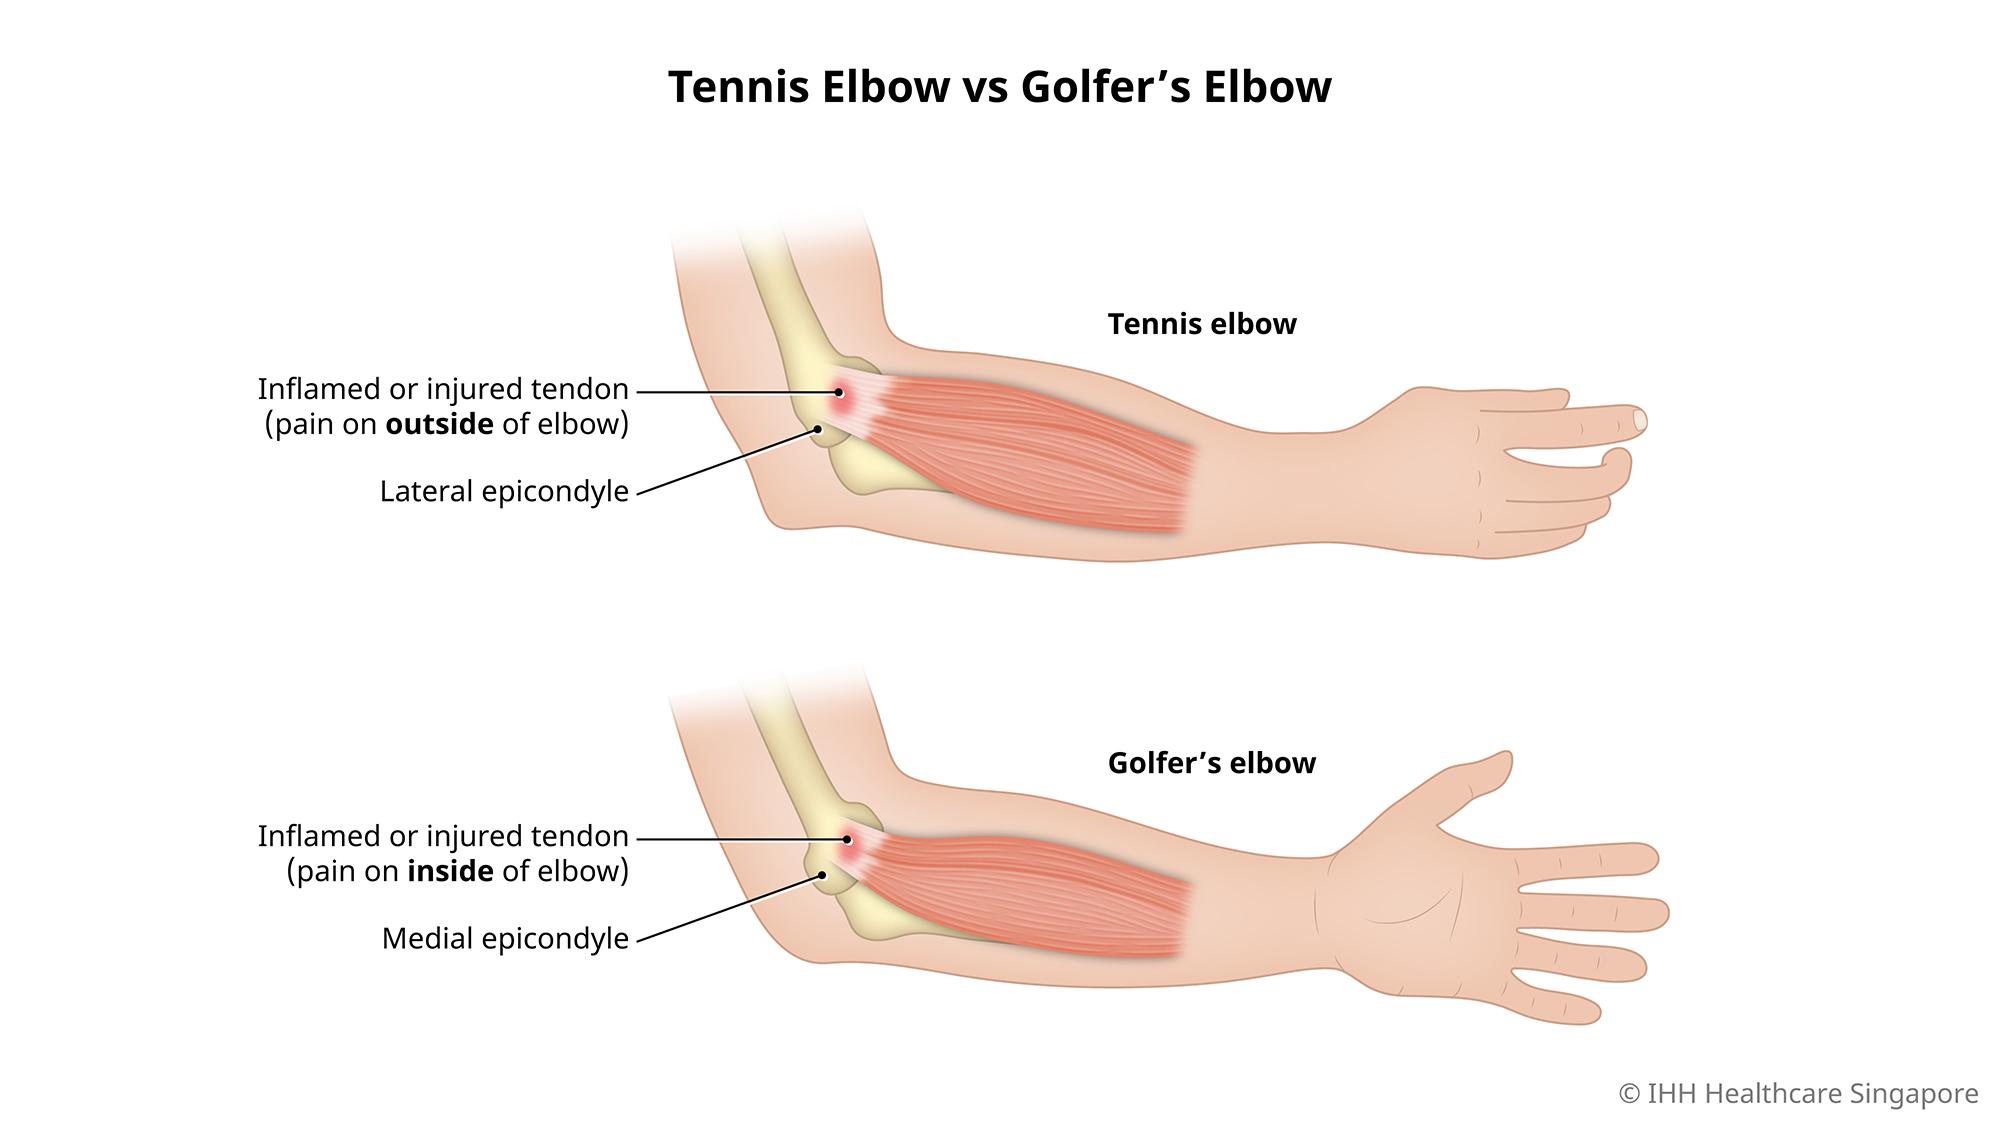 Difference between a tennis elbow and a golfer's elbow